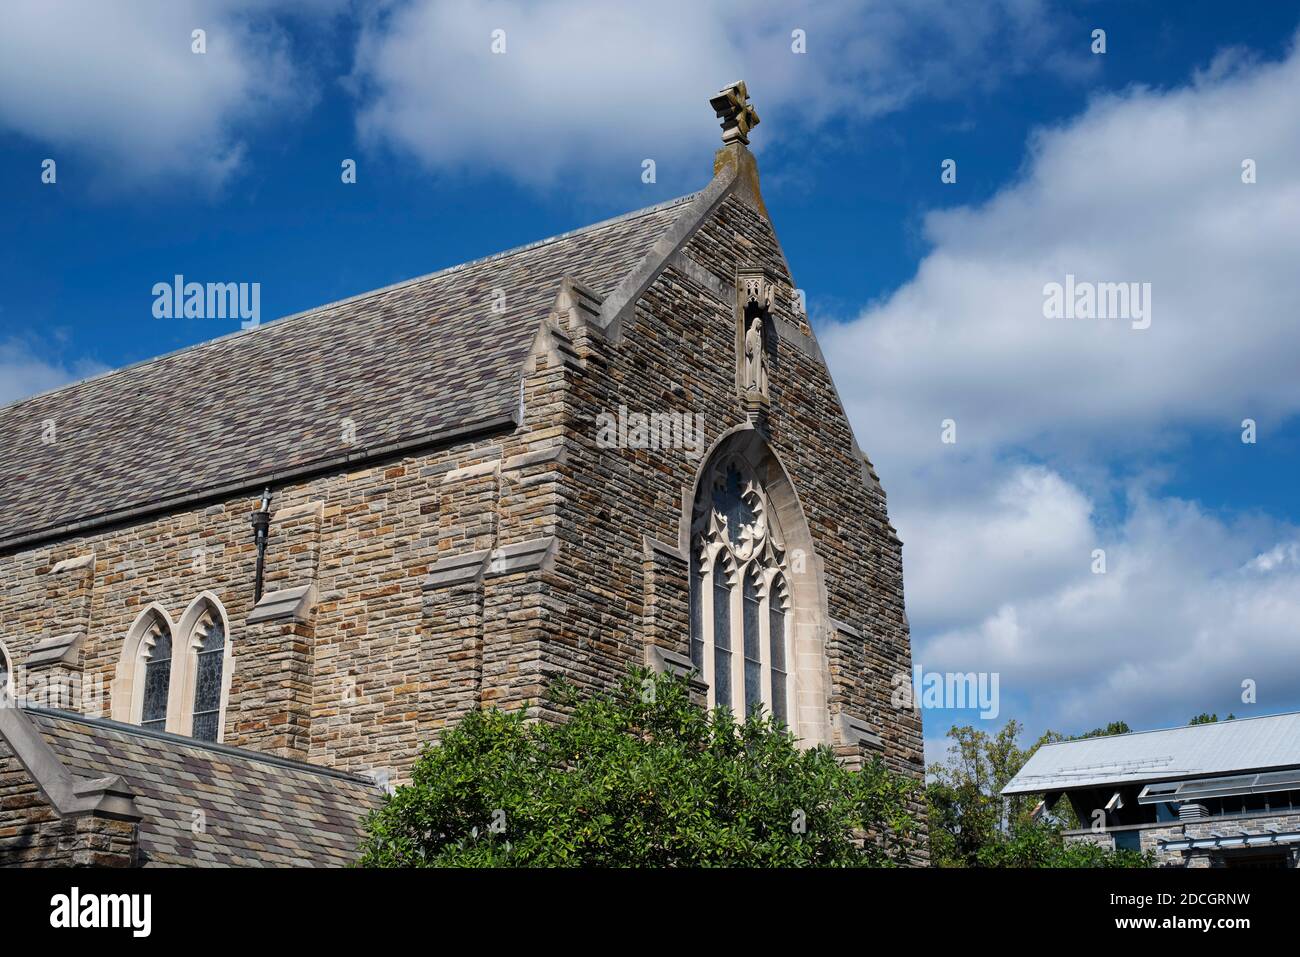 The front entrance and exterior of the loyola alumni memorial chapel on the evergreen campus at Loyola University in Baltimore Maryland on a sunny blu Stock Photo